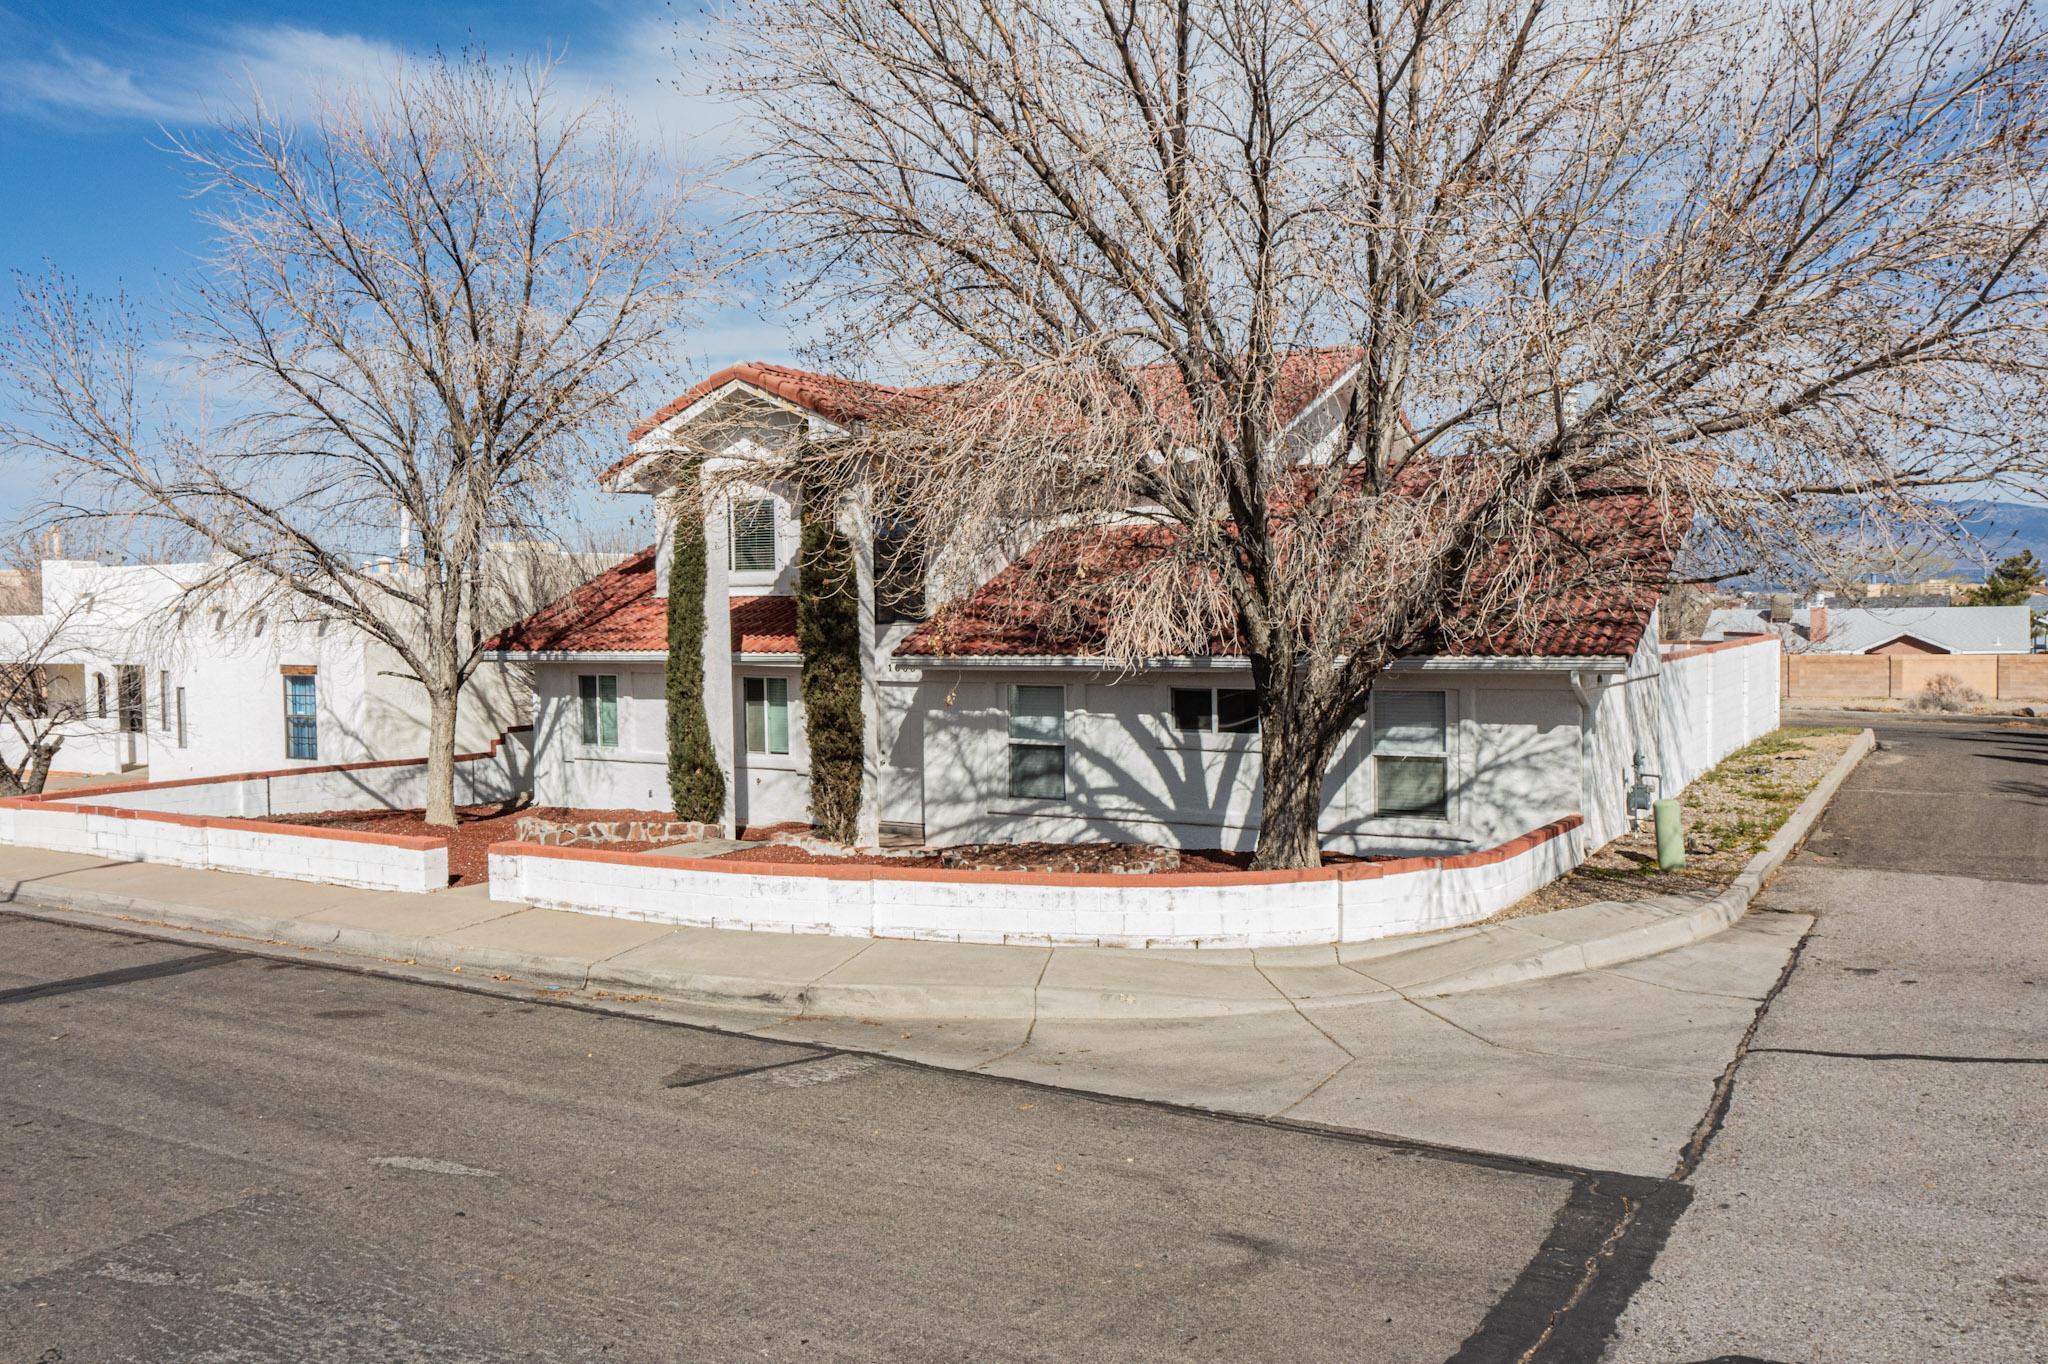 1600 Rosewood Avenue NW, Albuquerque, New Mexico 87120, 3 Bedrooms Bedrooms, ,3 BathroomsBathrooms,Residential,For Sale,1600 Rosewood Avenue NW,1058974